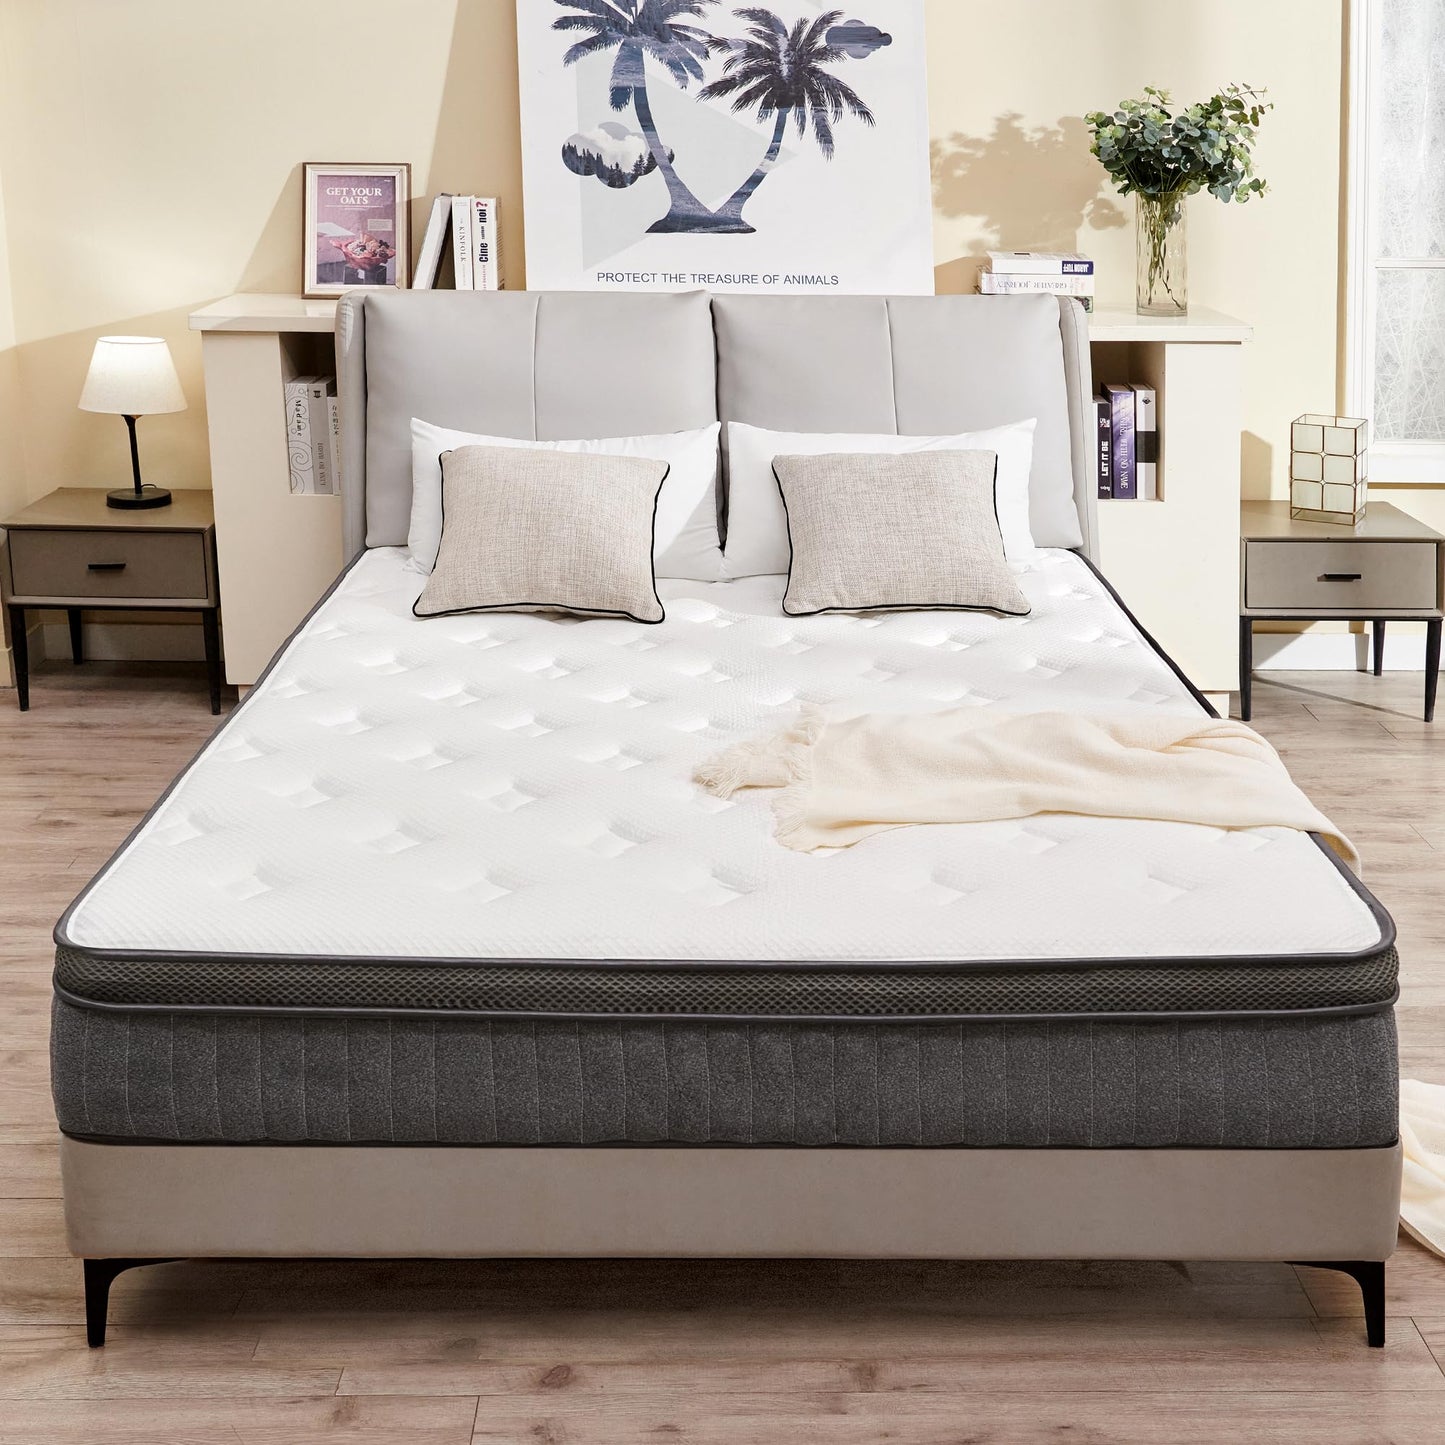 BDEUS Queen Mattress, 10 inch Gel Memory Foam Hybrid Mattress in a Box with 7-Zone Individual Pocket Spring for Cooling Sleep & Pressure Relief, Medium Firm Bed Mattresses